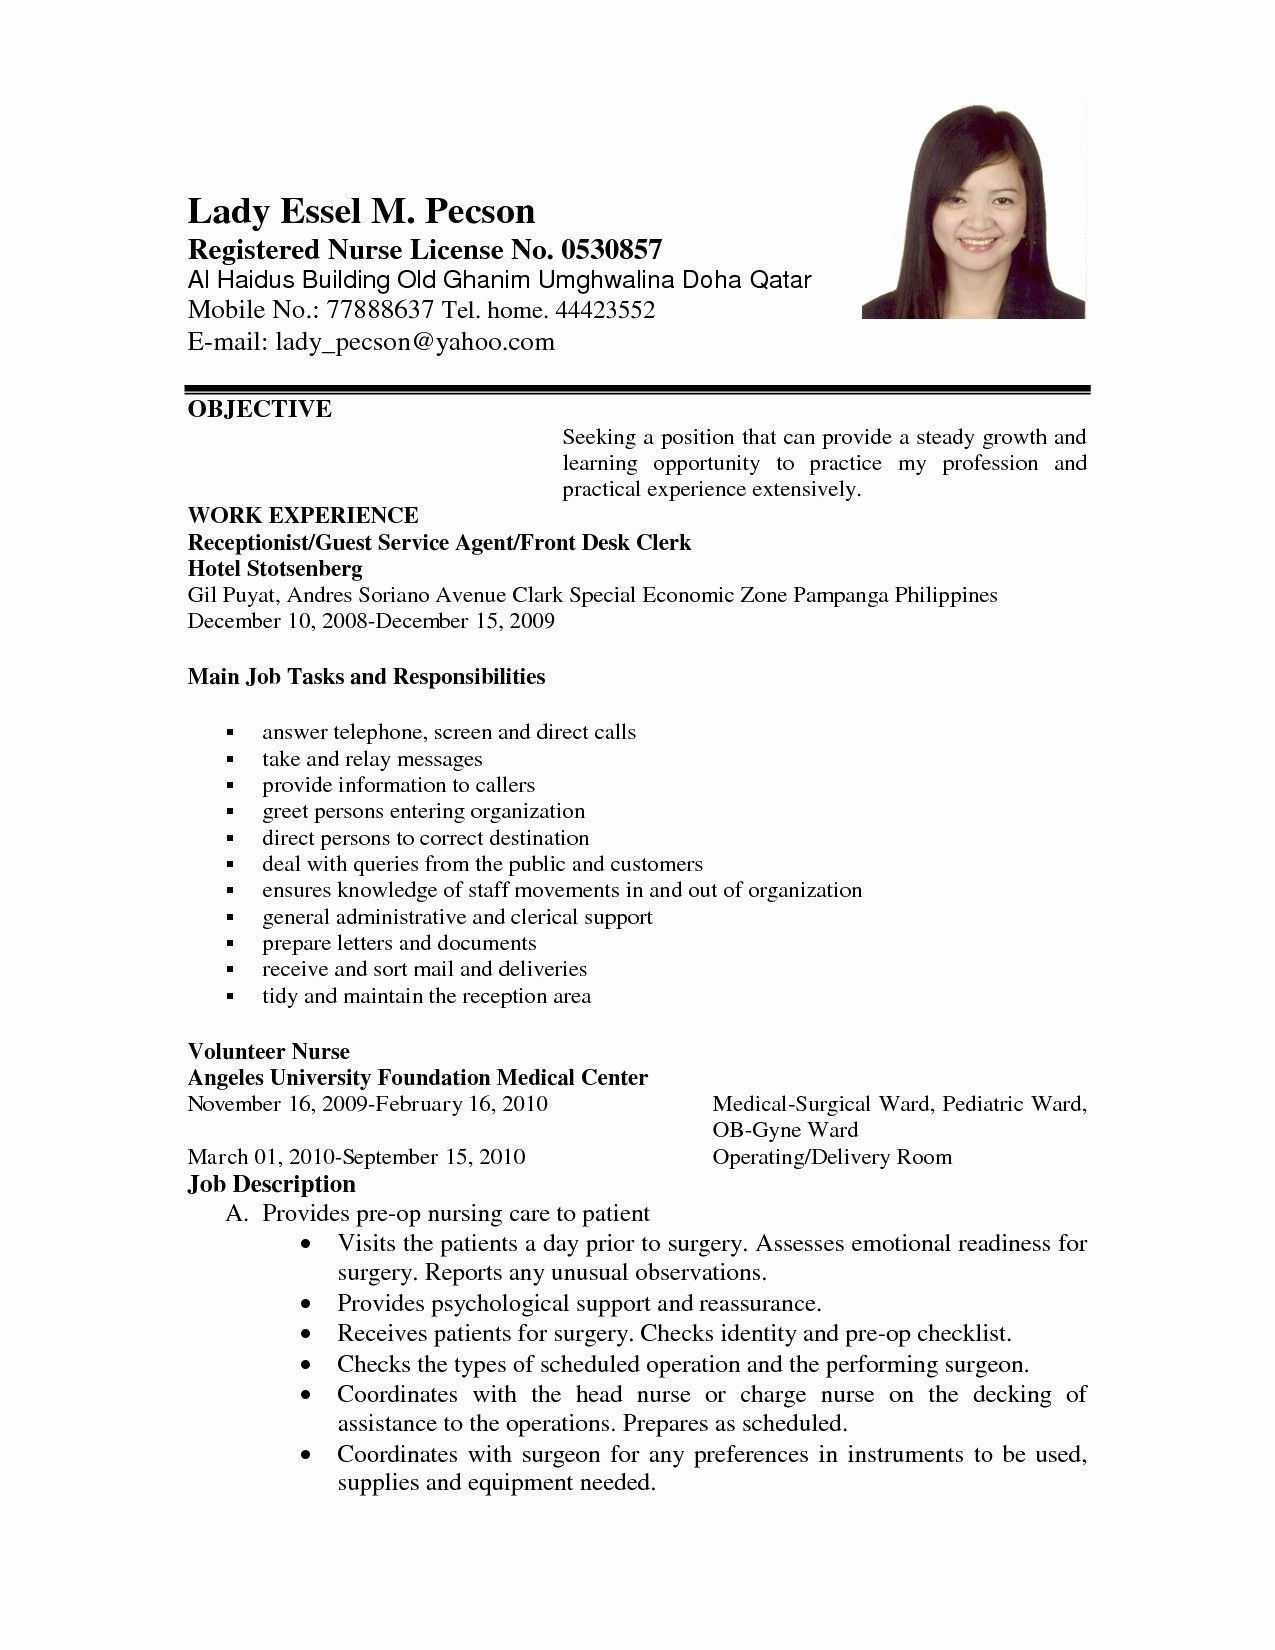 Sample Resume for Fresh Graduate Nurses without Experience Philippines Writing Medical Resistant Resume with Samples Job Resume …